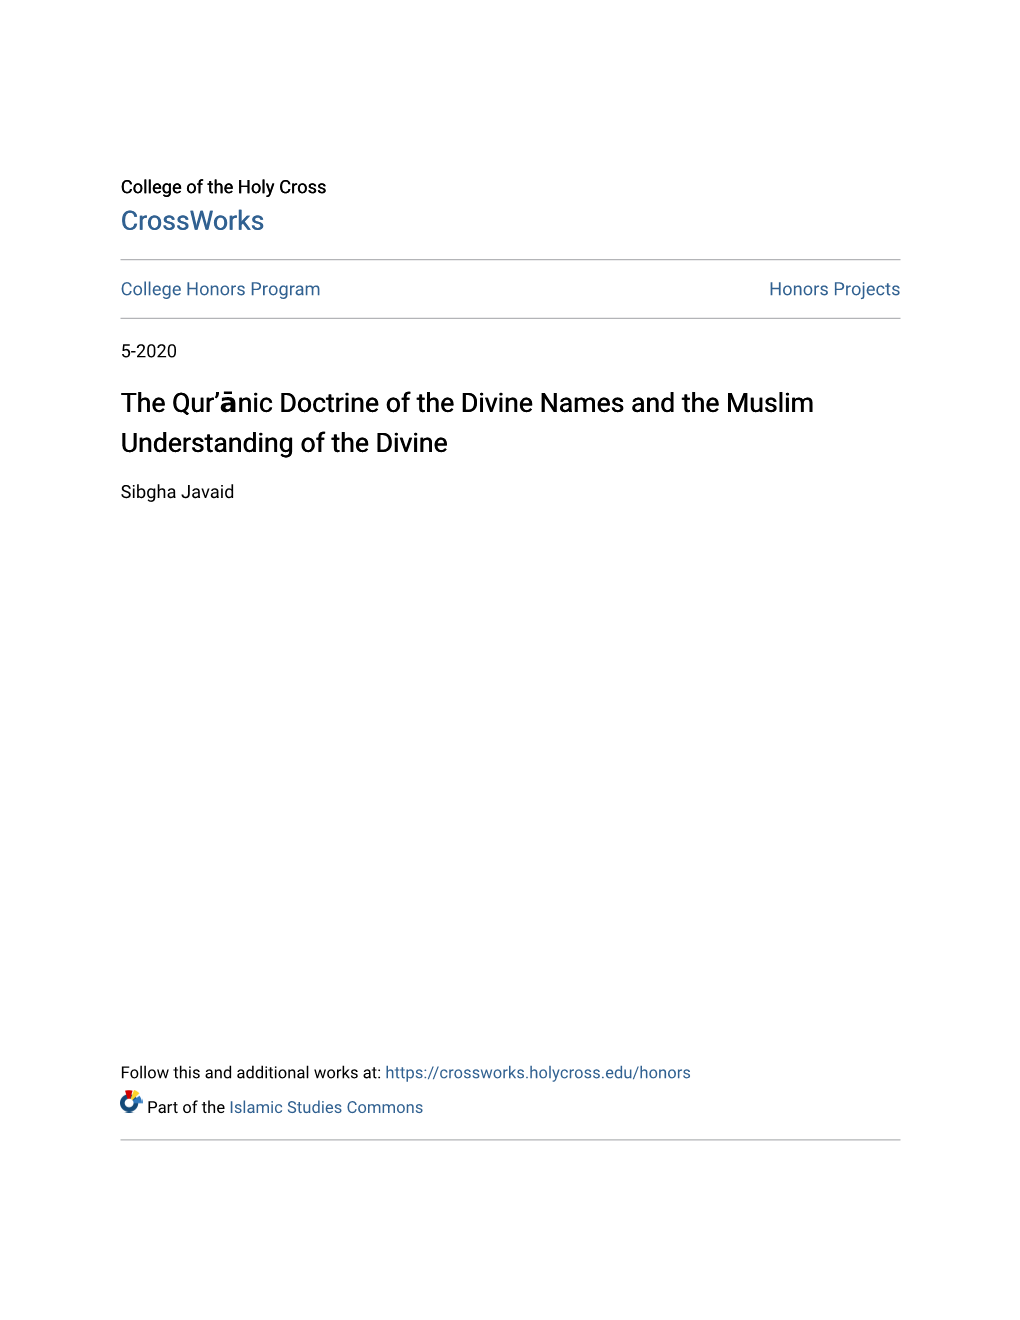 Crossworks the Qur'ānic Doctrine of the Divine Names and the Muslim